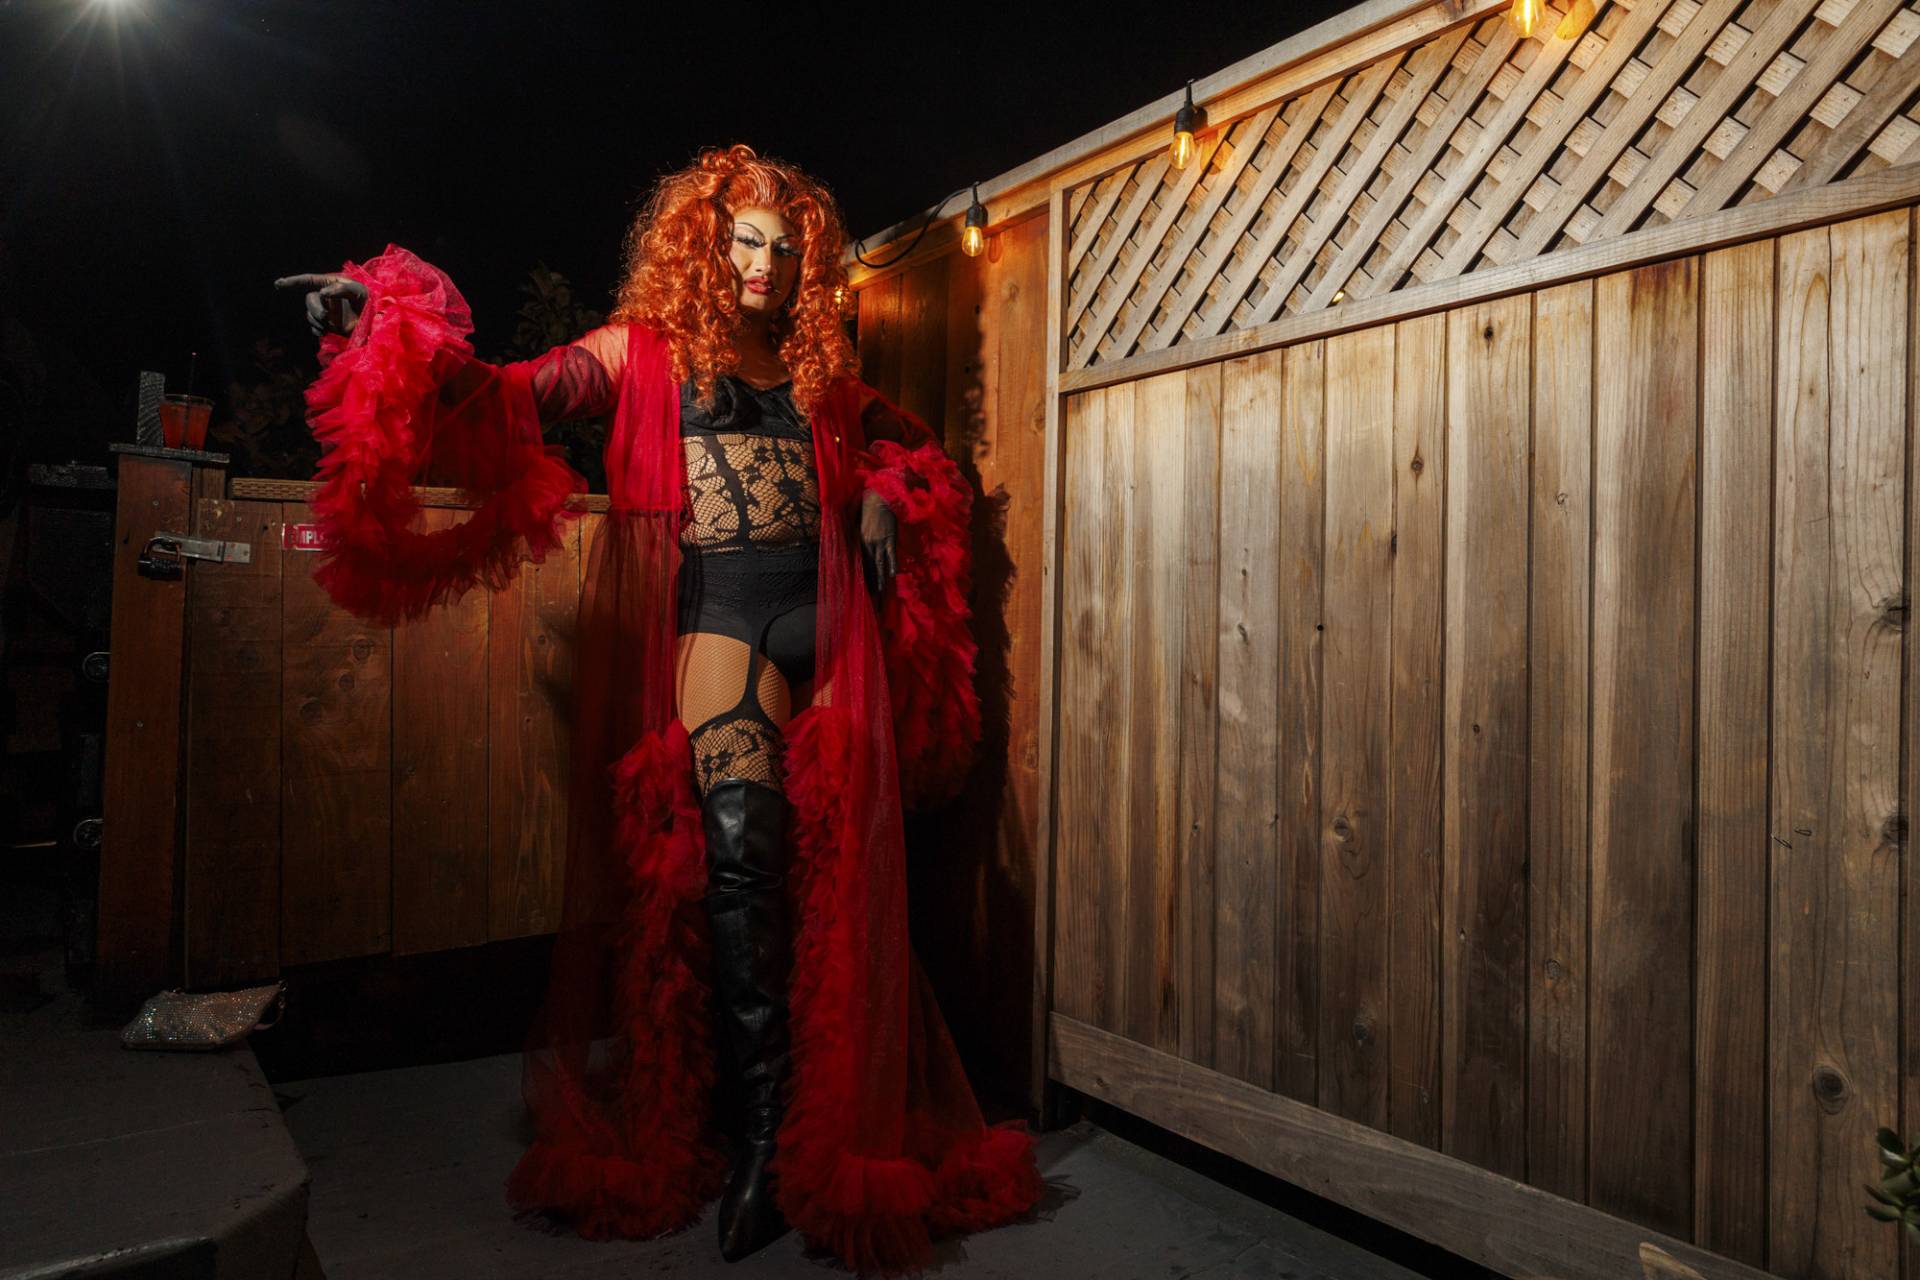 A drag queen strikes a pose in black lingerie and red dressing gown, next to a wooden fence decorated with lights.